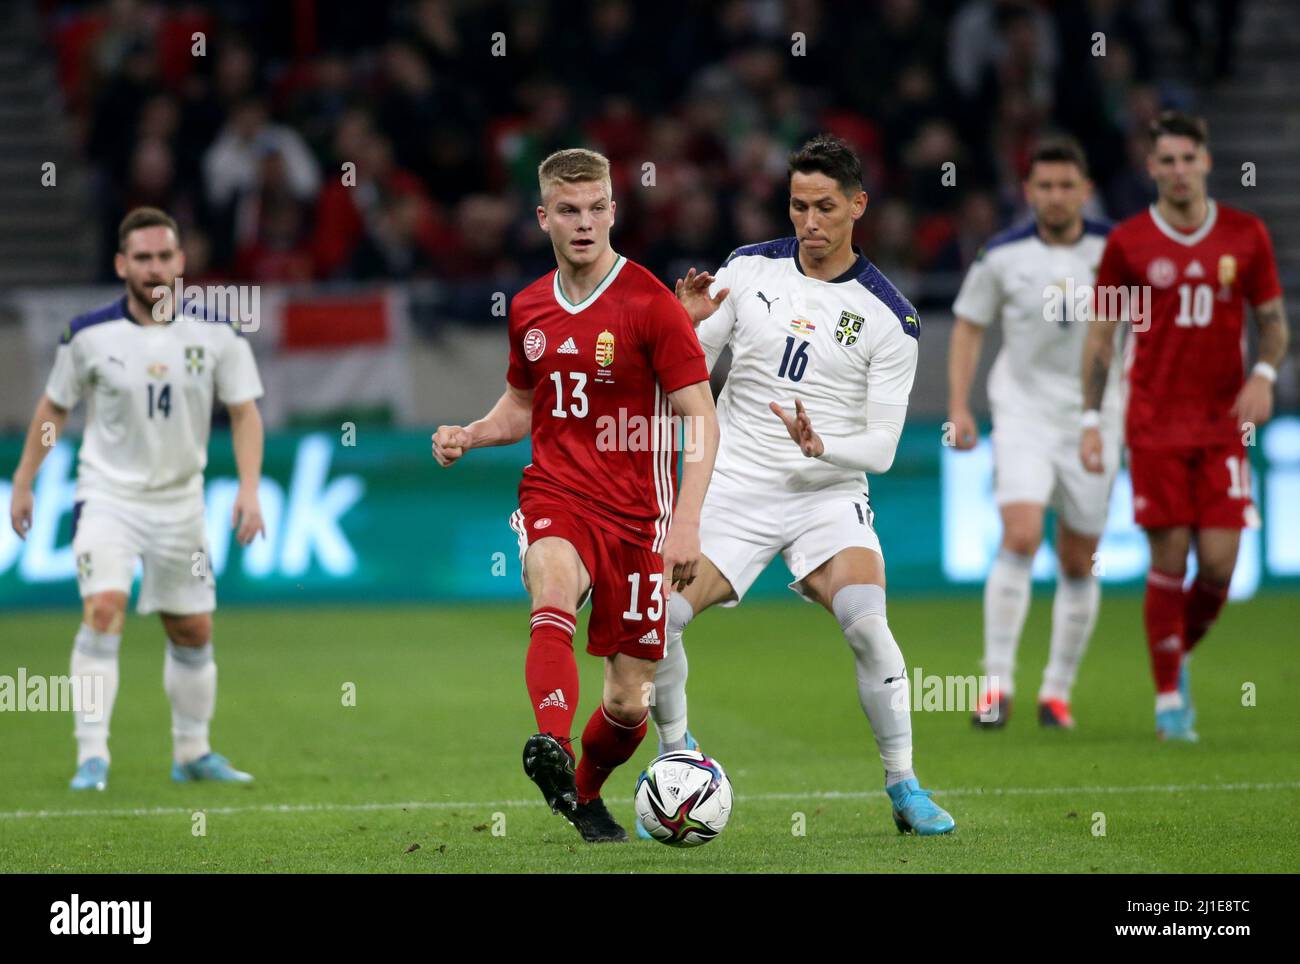 BUDAPEST, HUNGARY - MARCH 24: Andras Schafer of Hungary competes for the ball with Sasa Lukic of Serbia ,during the international friendly match between Hungary and Serbia at Puskas Arena on March 24, 2022 in Budapest, Hungary. (Photo by MB Media) Stock Photo